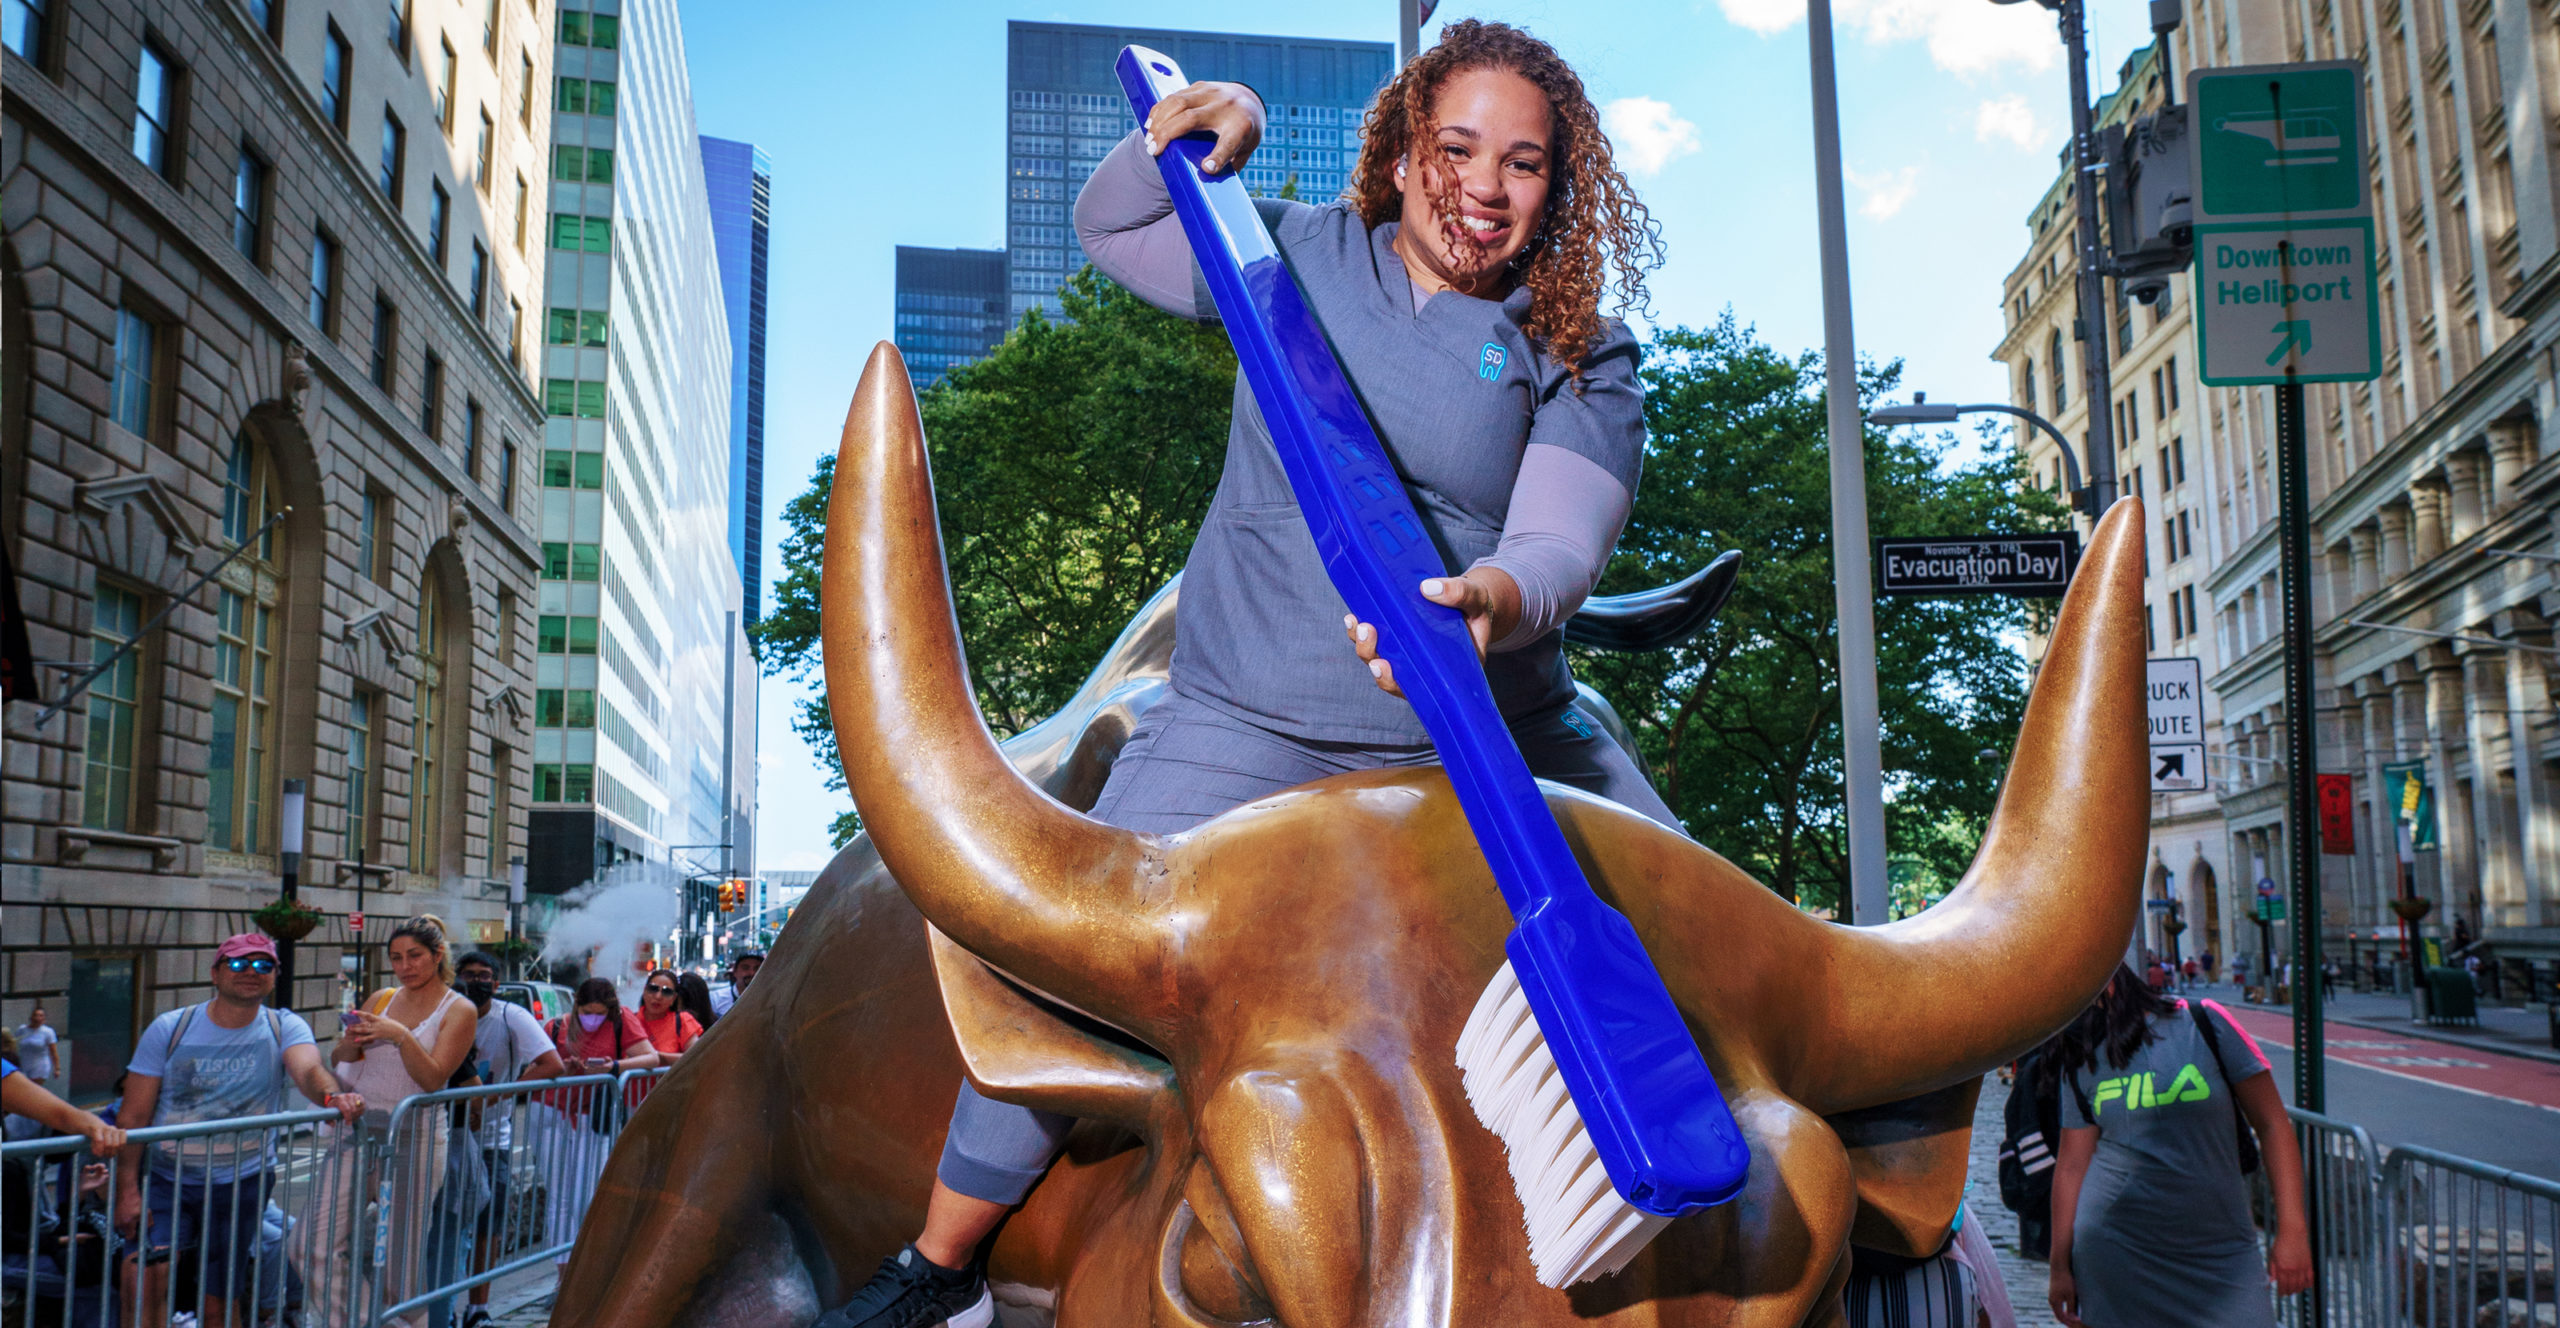 Sky Dental assistant sits smiling atop Wall Street Bull. She appears poised to brush the statue's teeth with a giant toothbrush.